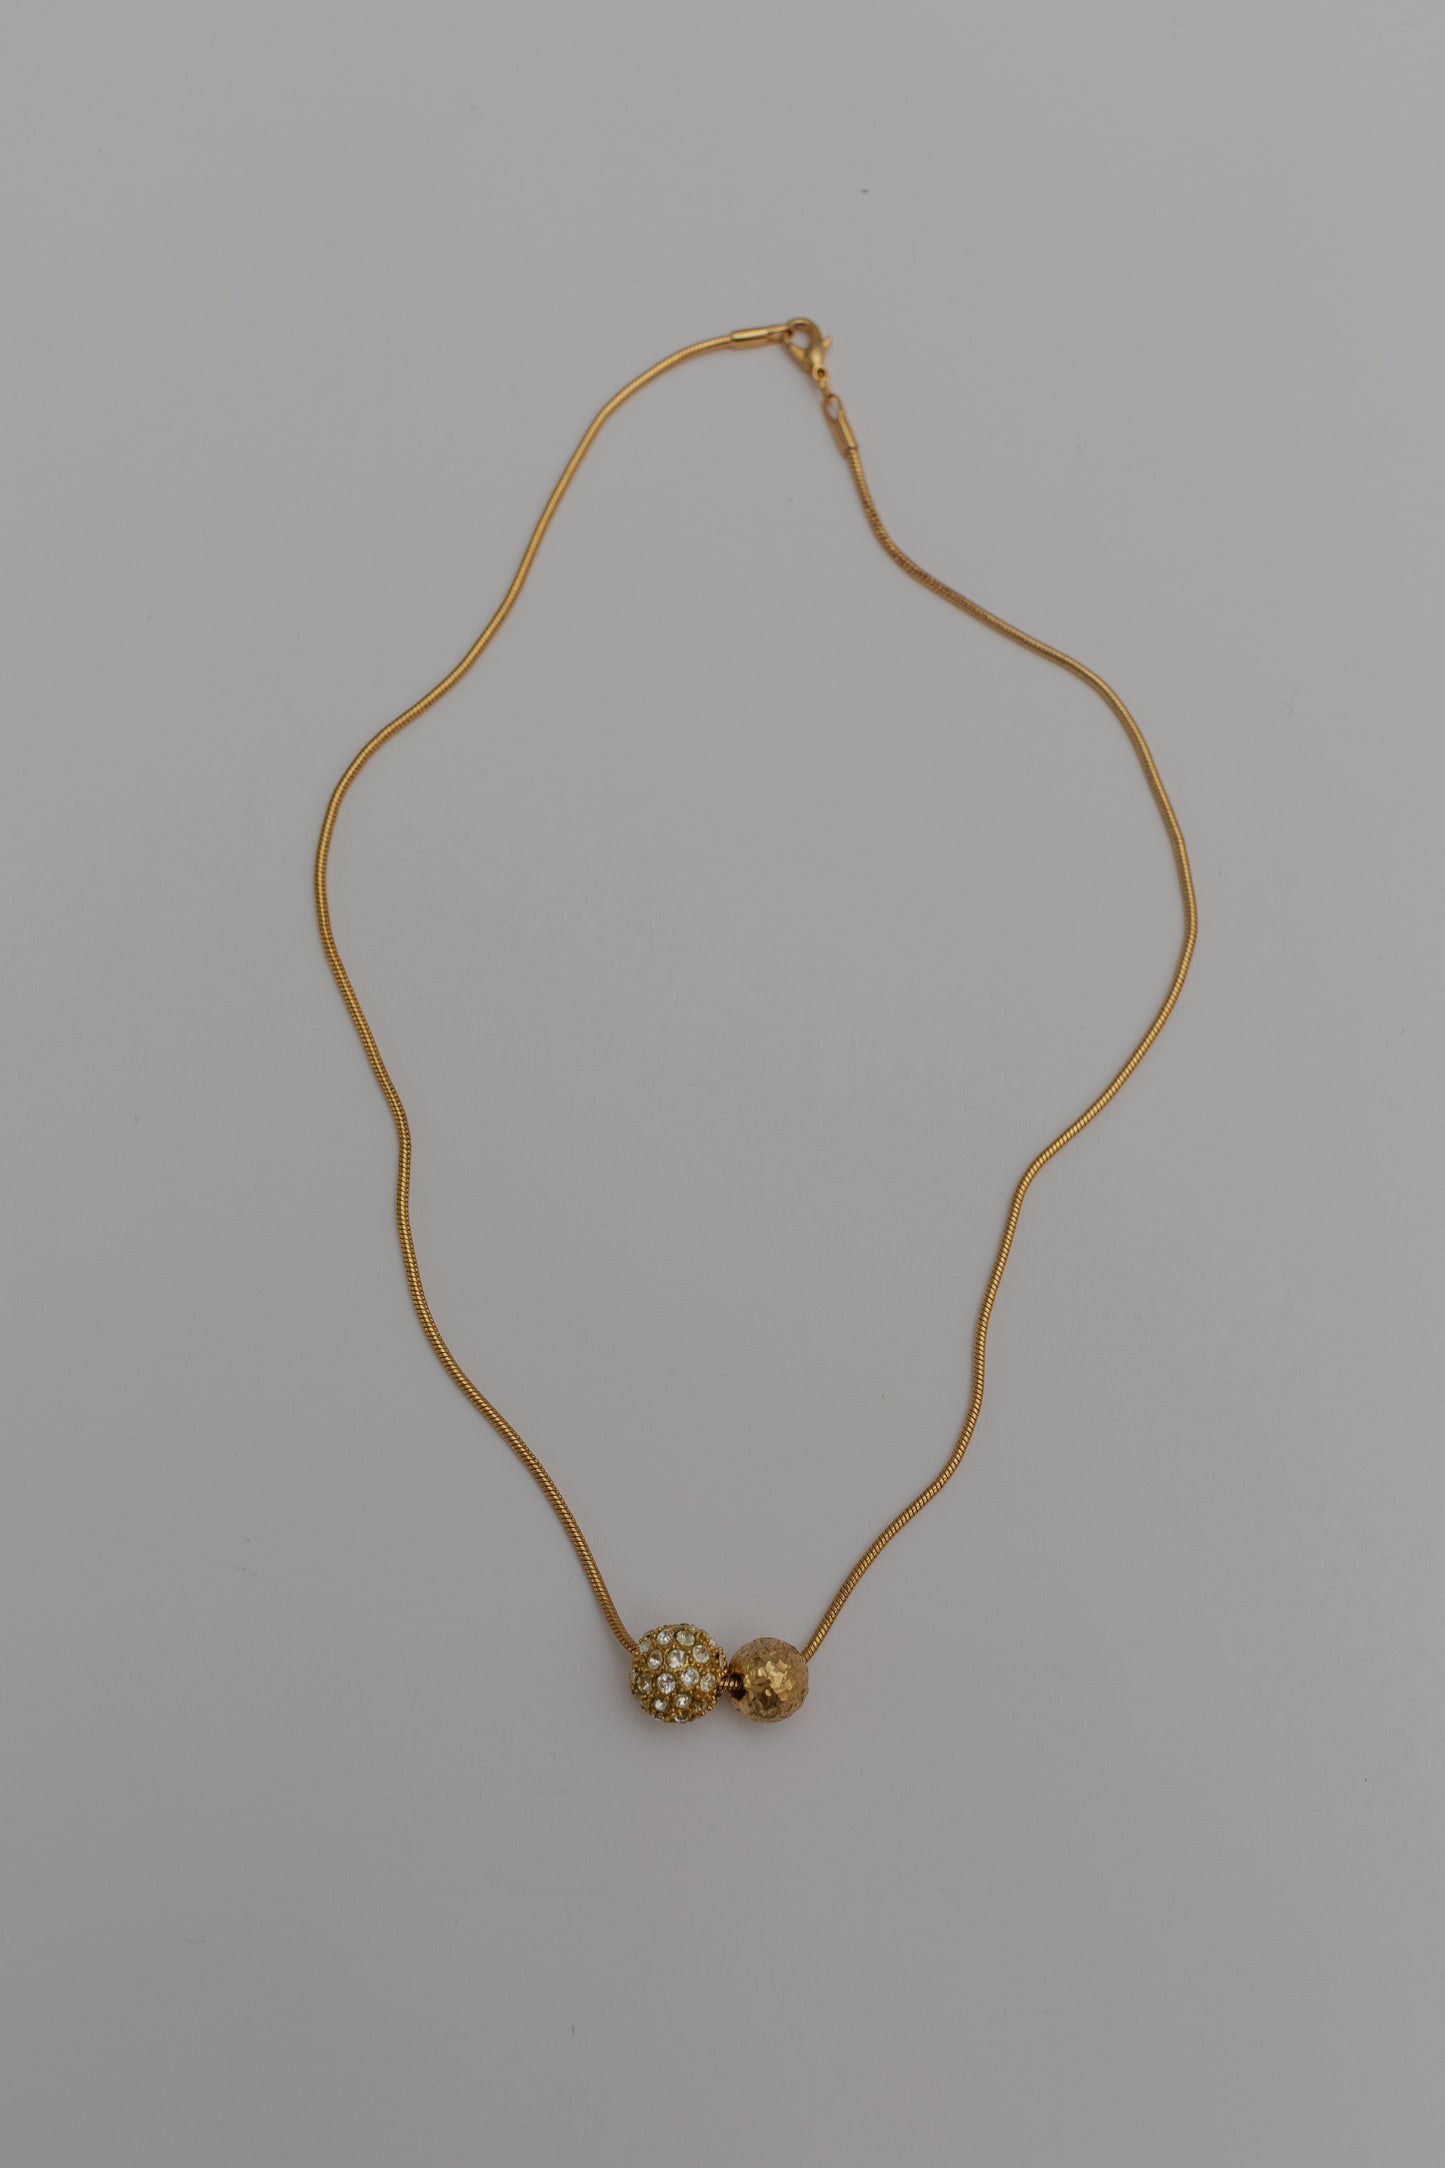 Necklace with double pendant